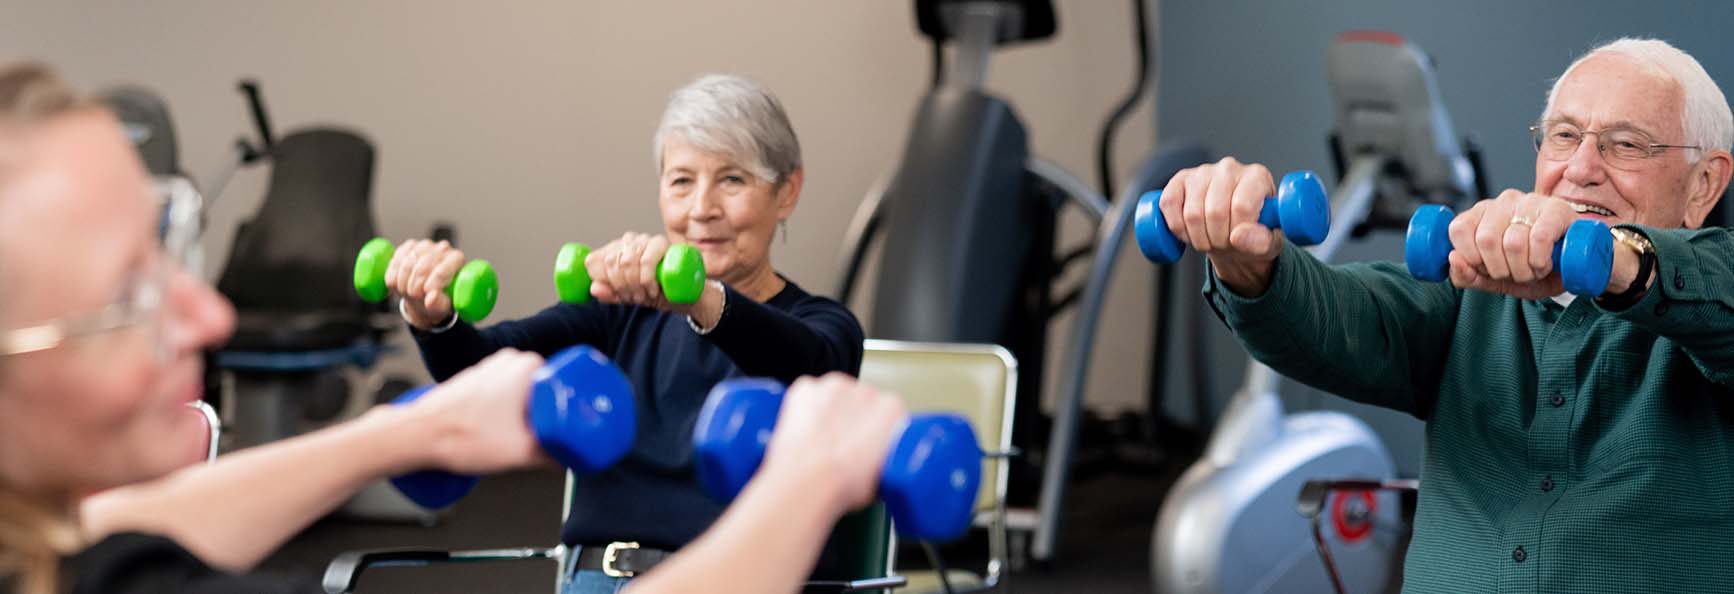 Patients using weights with clinical staff